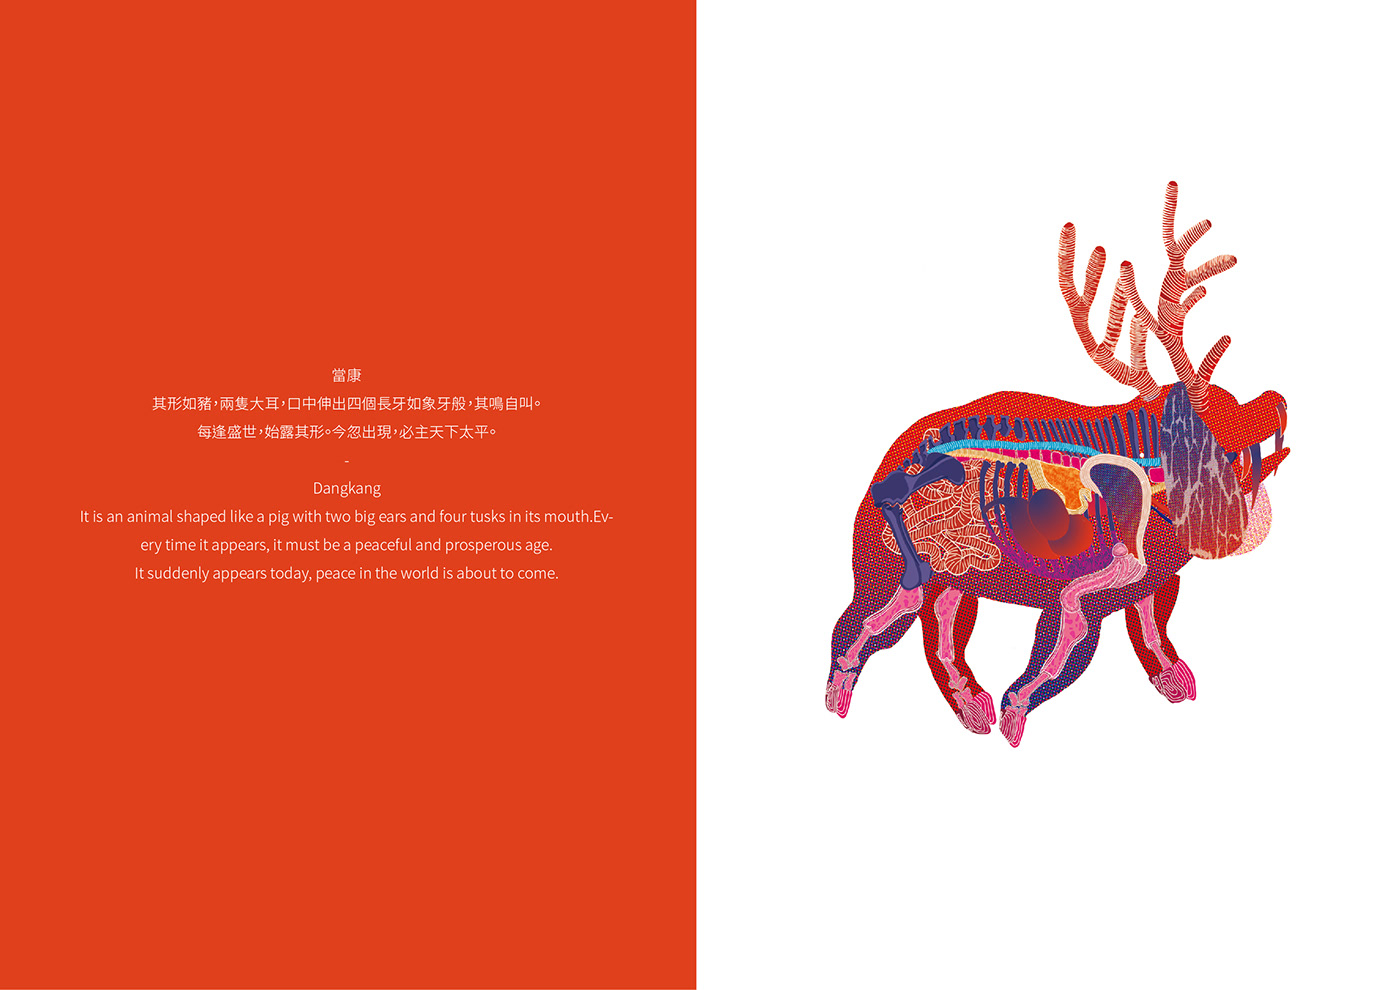 Bookdesign chinese Chinesedesign design graphic Illustrator Chinese style